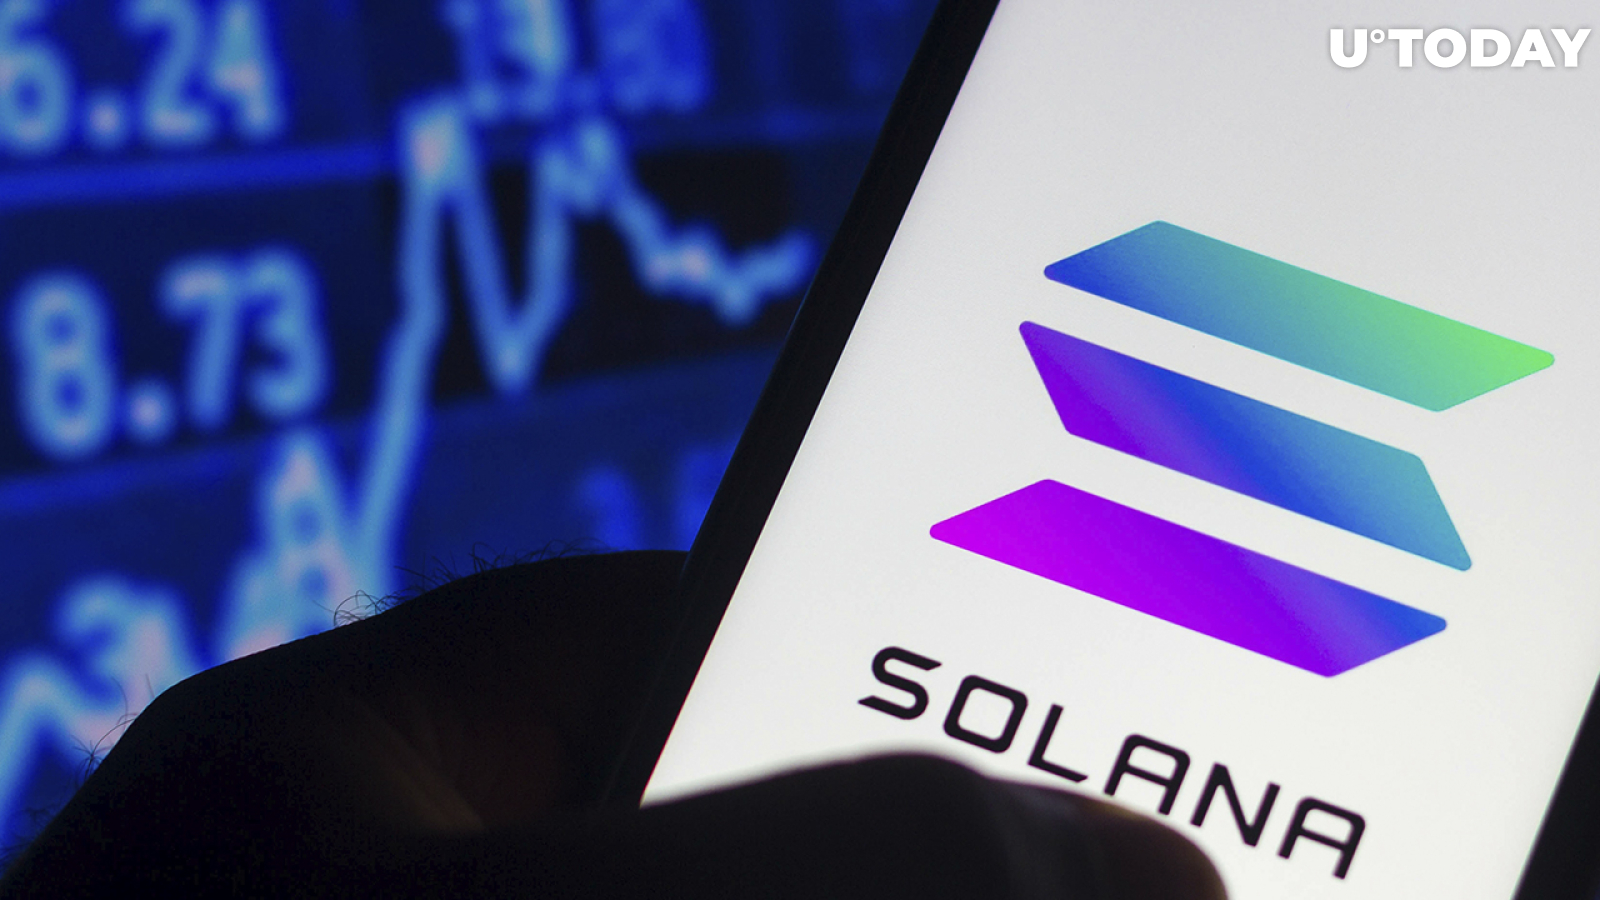 Solana-Based App Lost $50 Million Due to Fake Account Exploit, Here's How